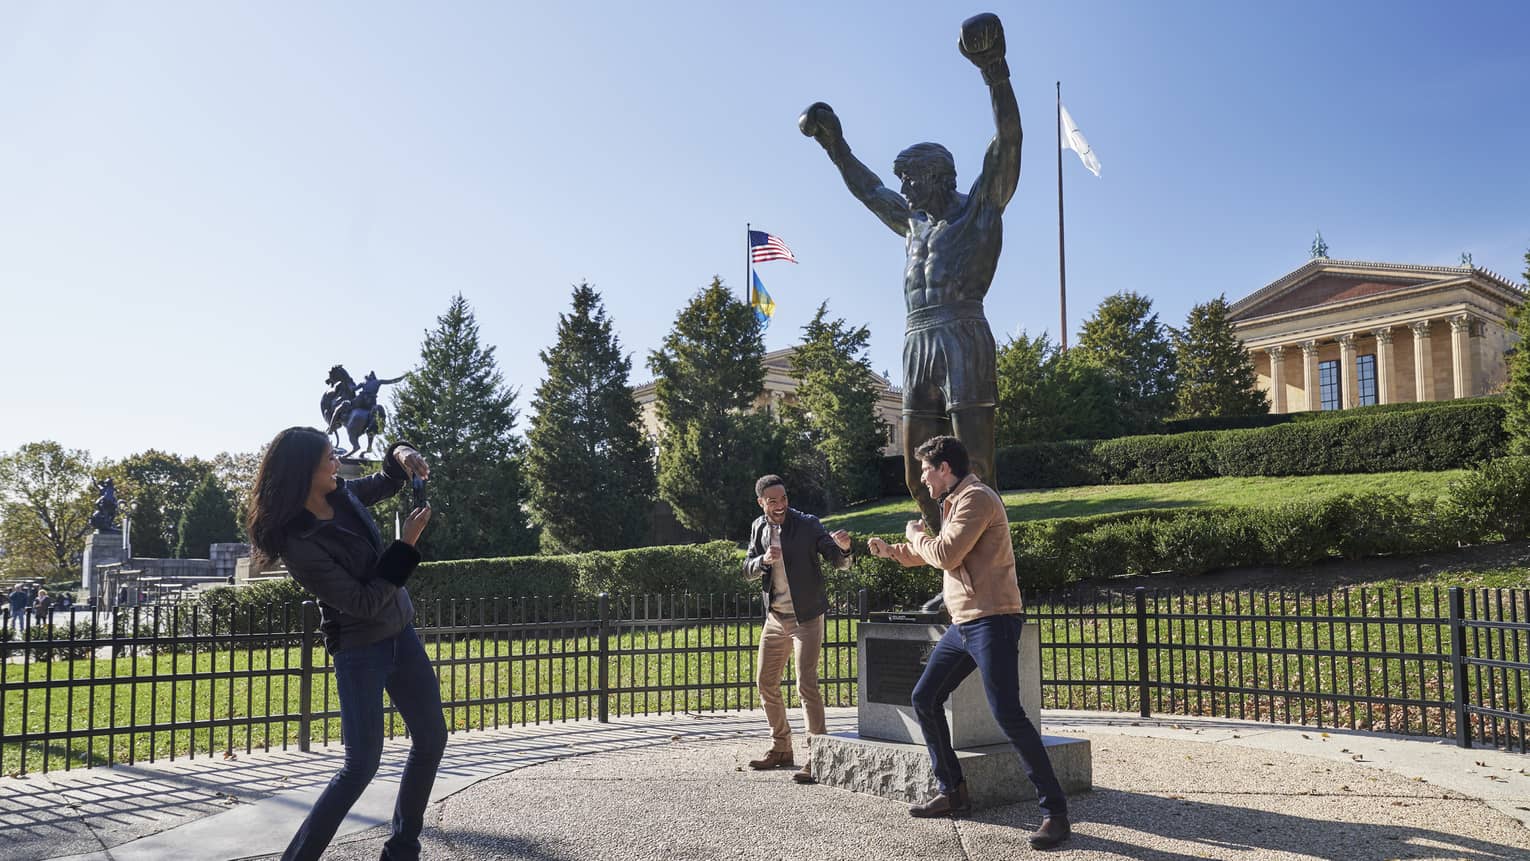 Two people pretend to box in front of the Rocky statue against a bright blue sky; another takes their photo, laughing.